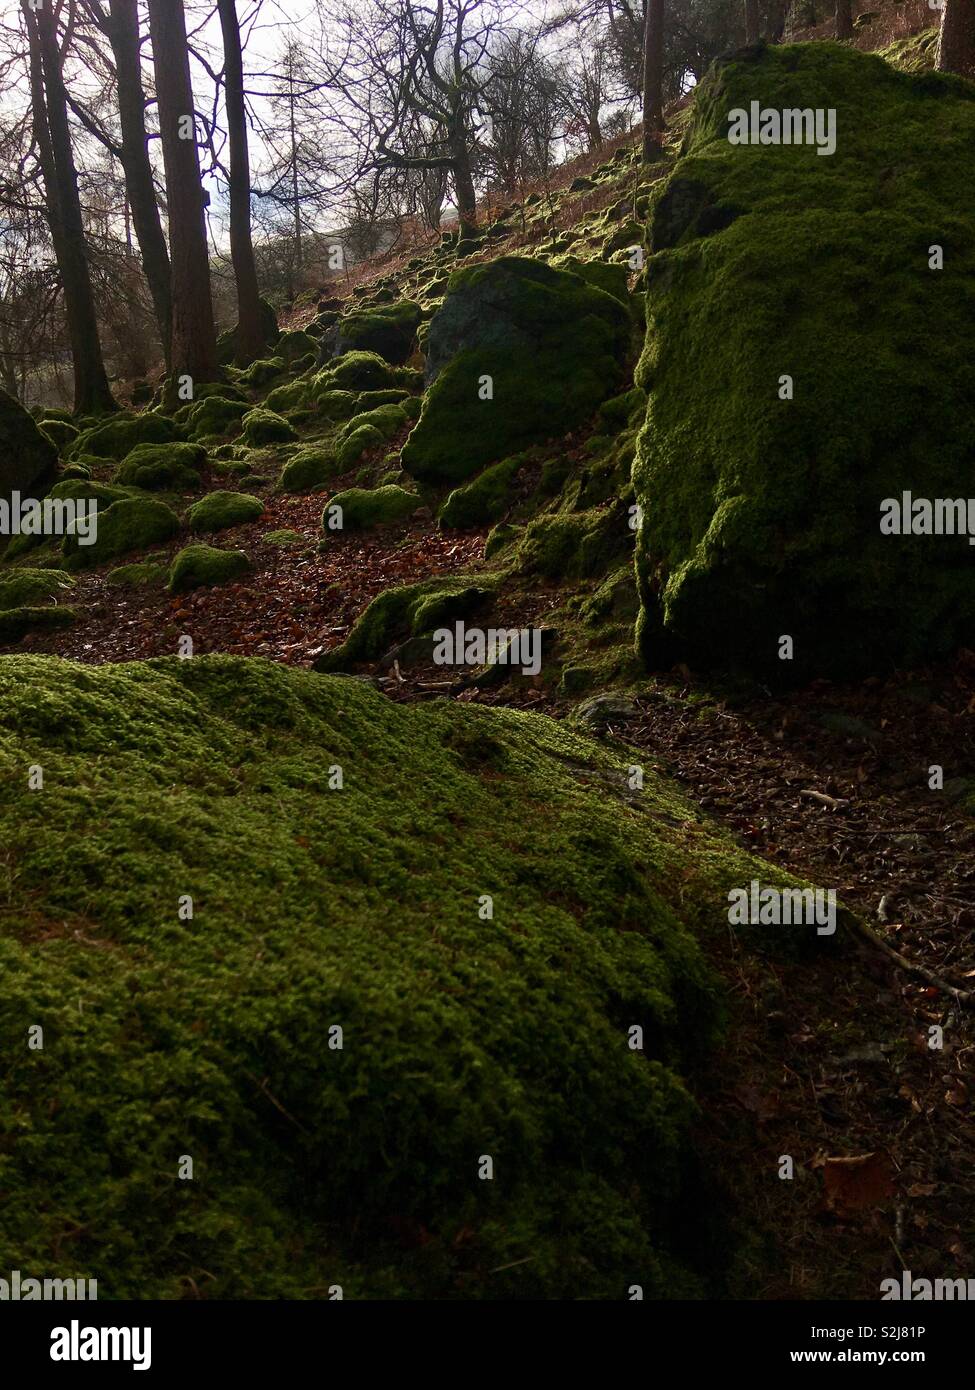 Woodland with boulders covered in bright green moss Stock Photo